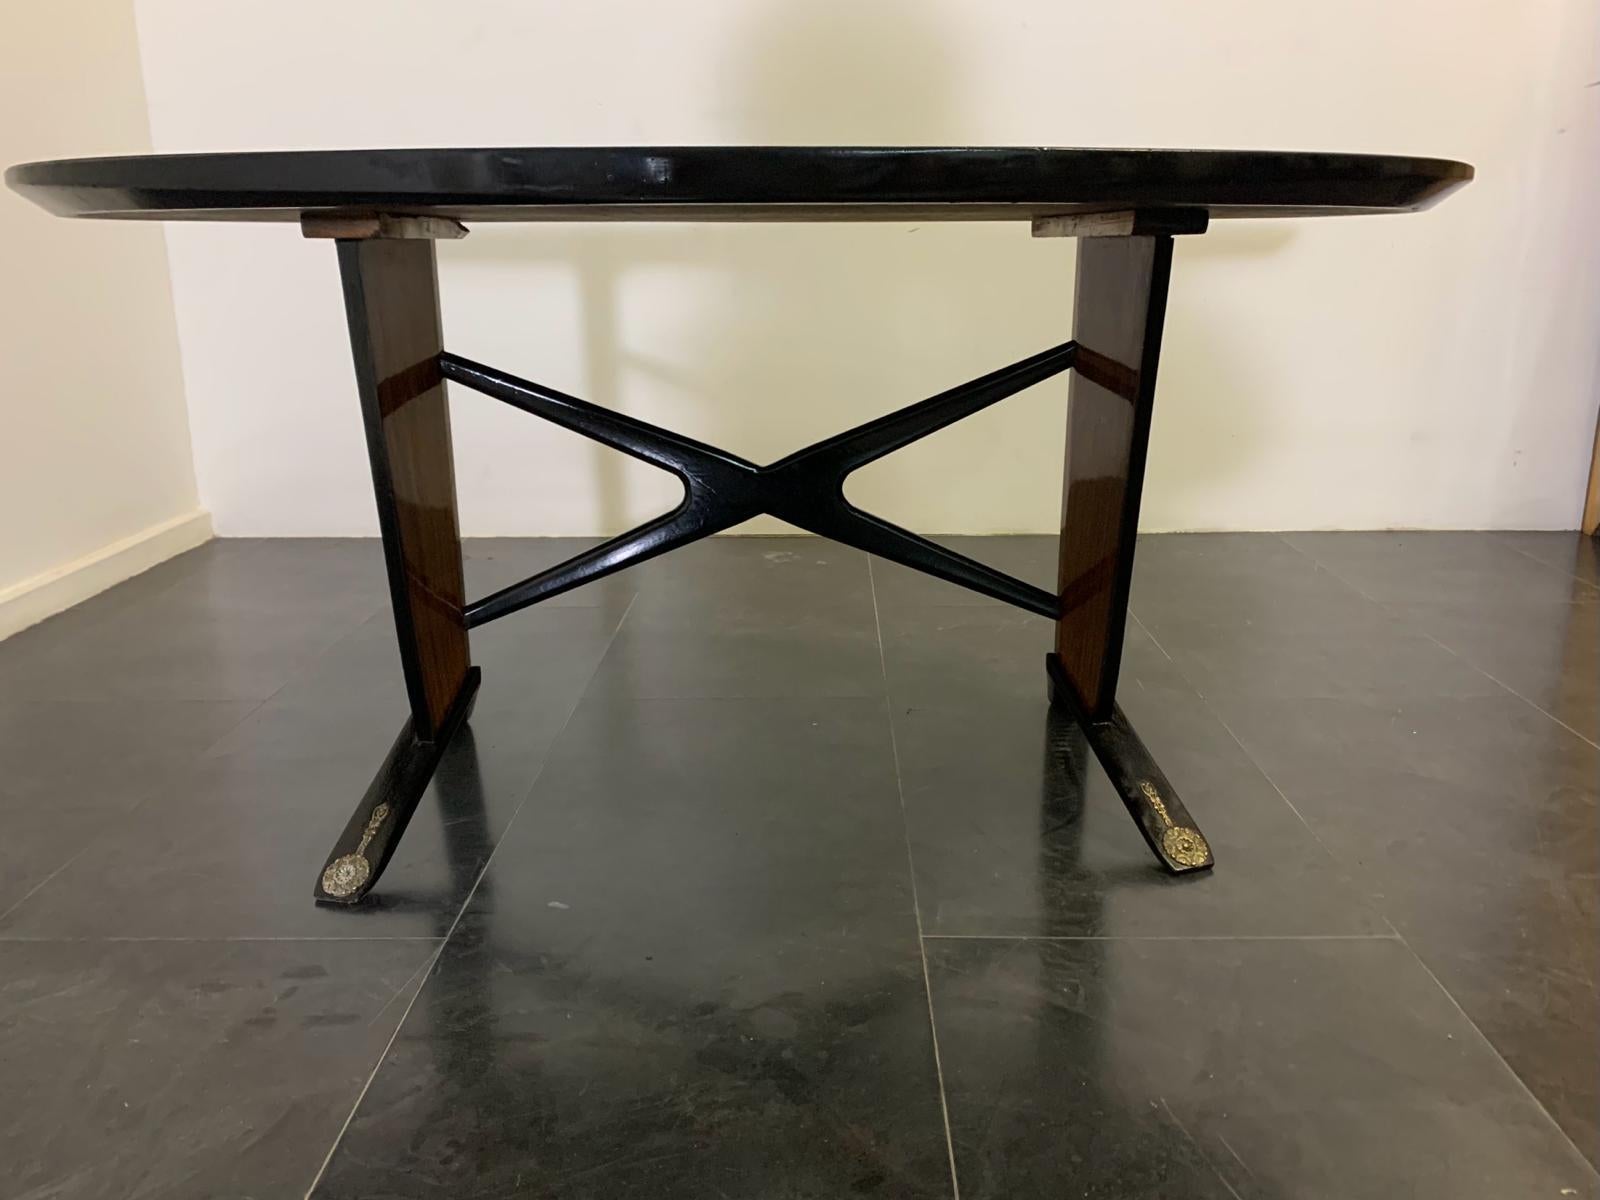 Italian Mid-Century Table with Black Inlays and Mahogany Brass Tips, 1950s For Sale